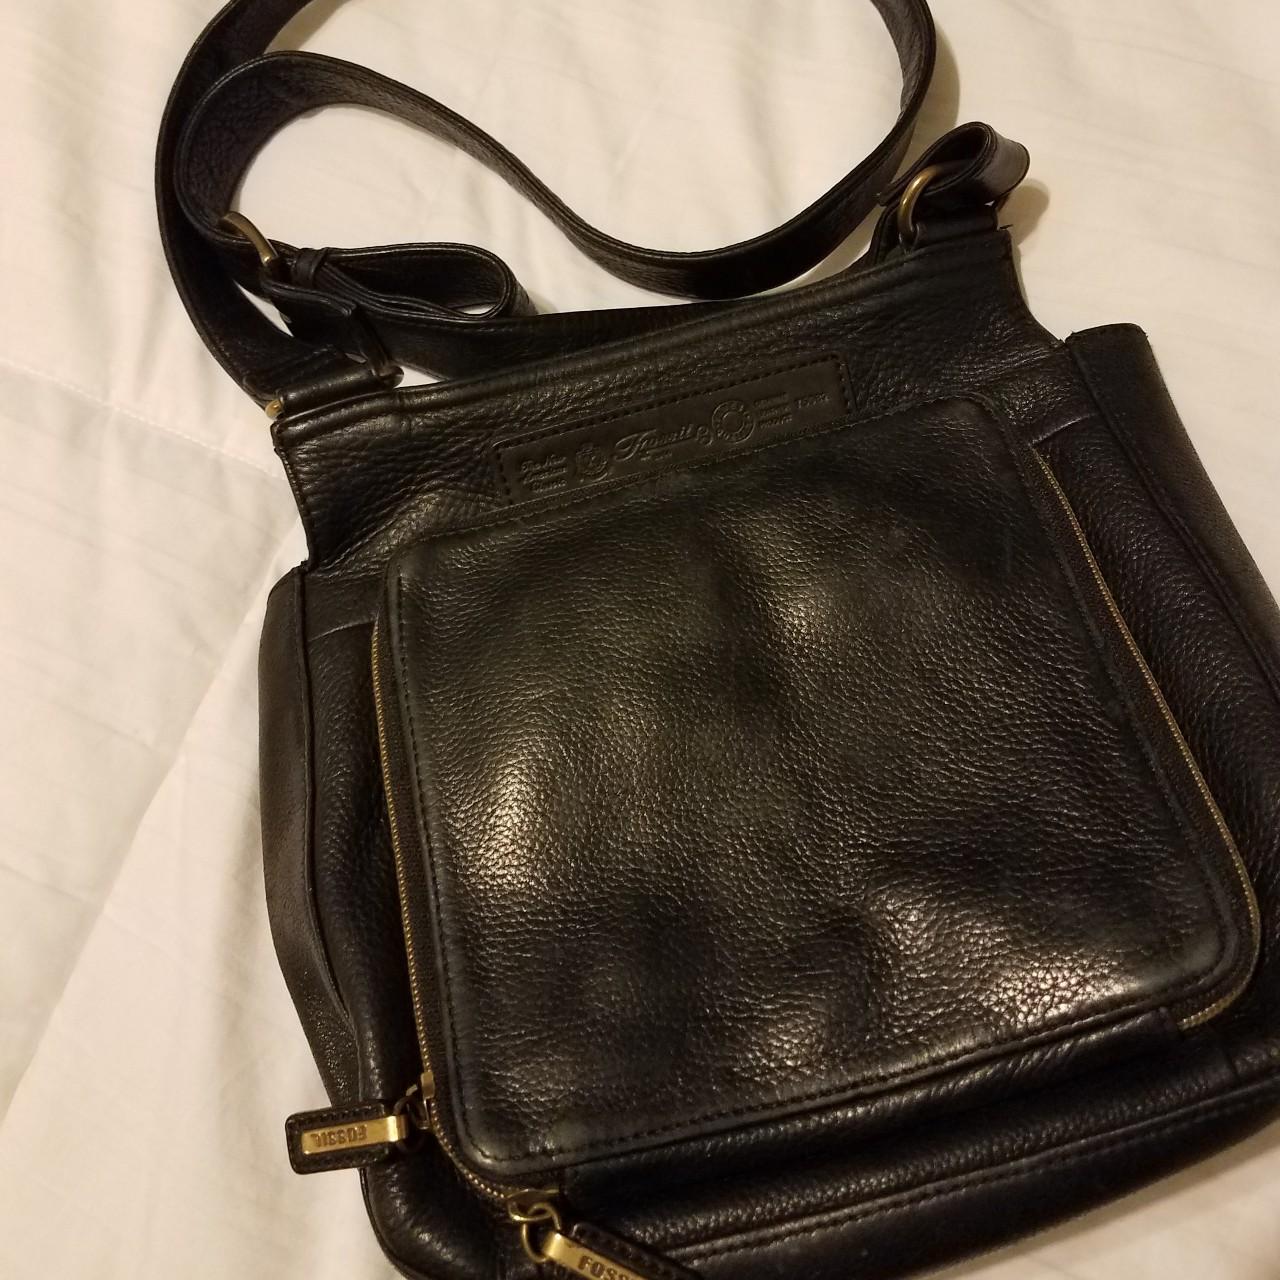 NWT Fossil Hathaway Black Leather Shopper Tote Hand Bag Purse Studded  Pockets | eBay